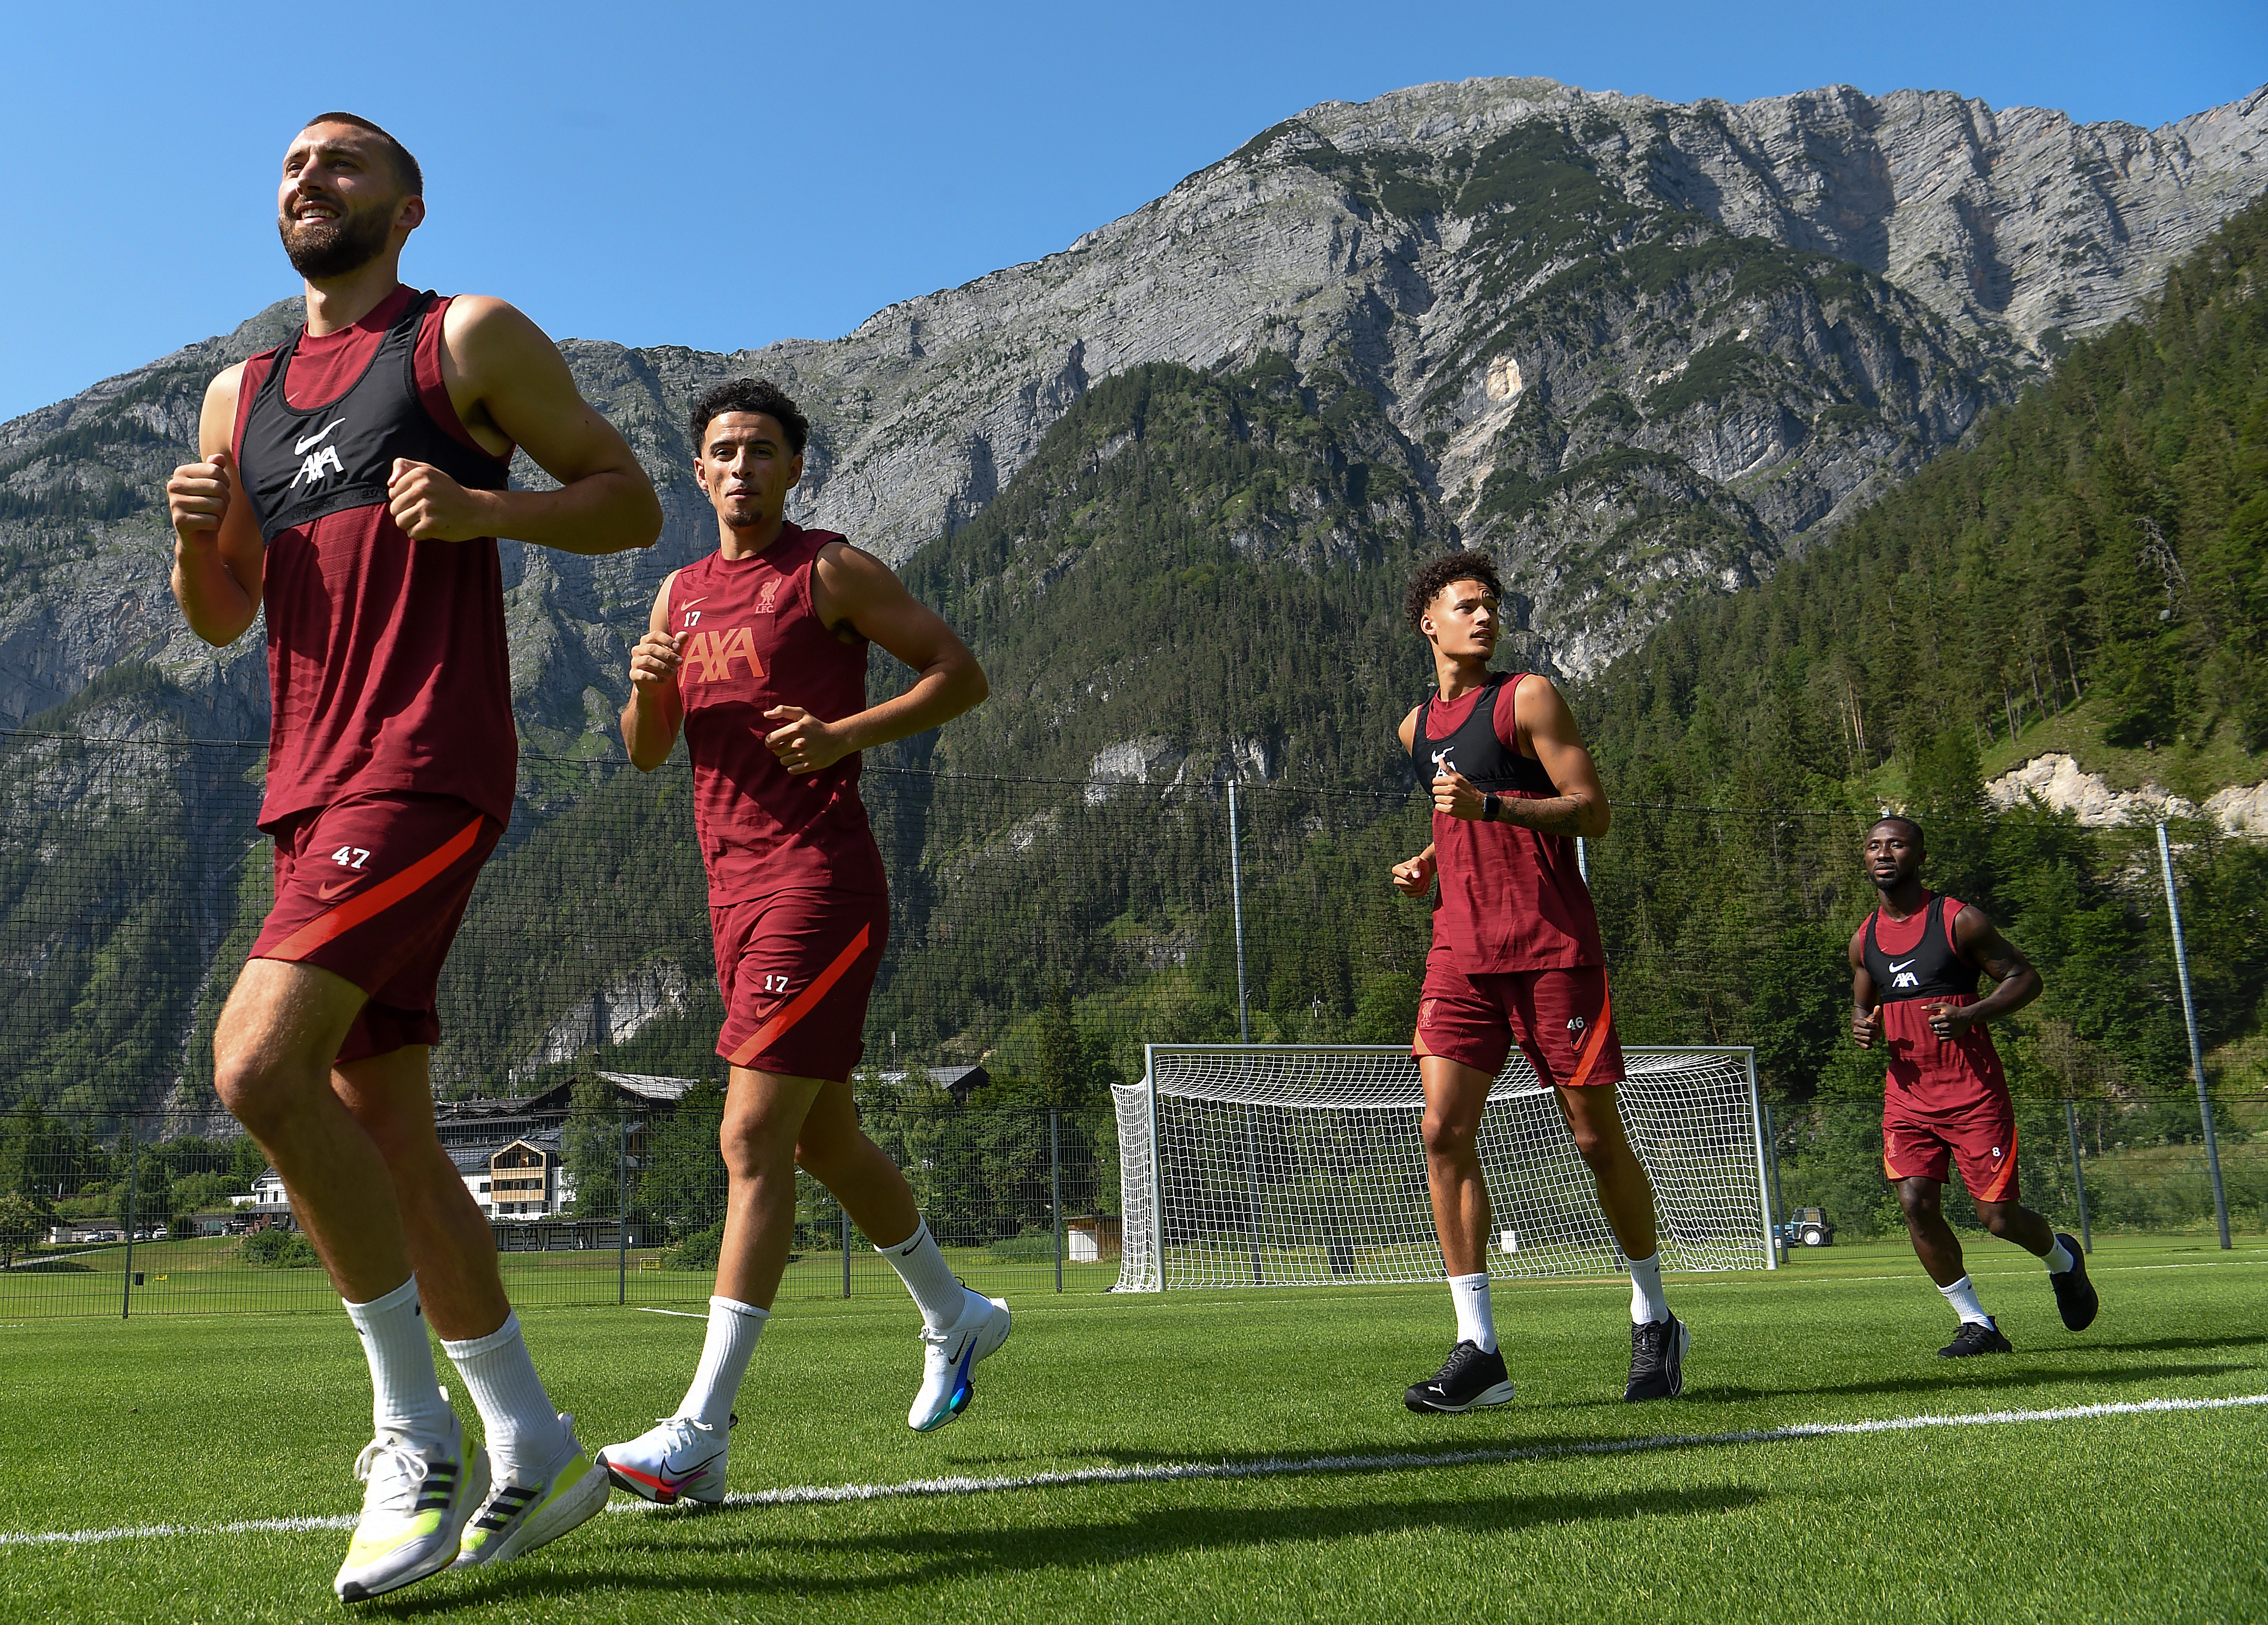 Nathaniel Phillips, Curtis Jones, Rhys Williams and Naby Keita of Liverpool during a training session on July 12, 2021 in Austria.